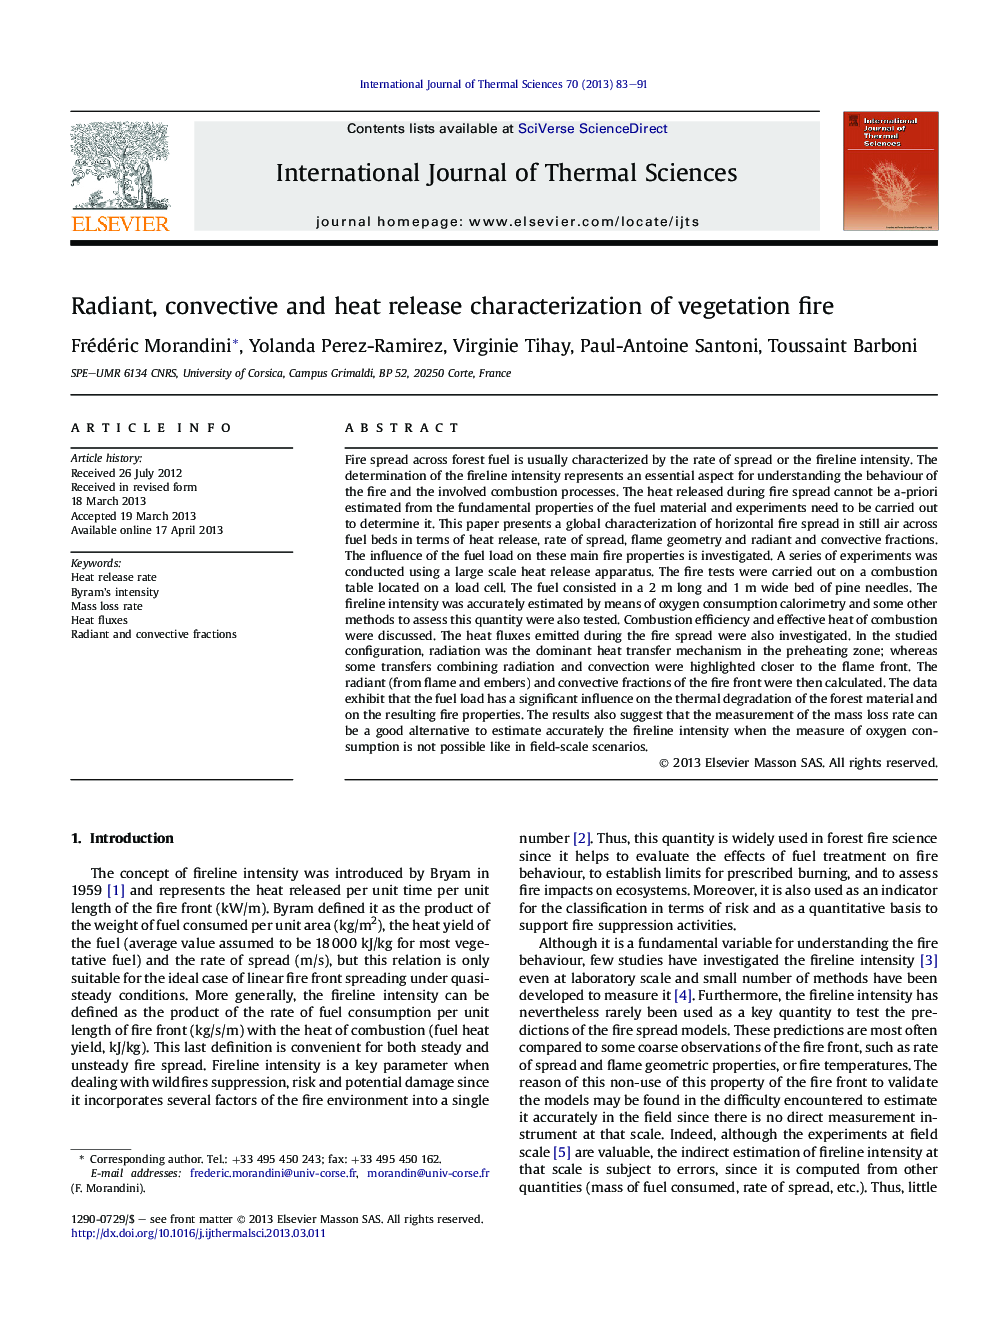 Radiant, convective and heat release characterization of vegetation fire